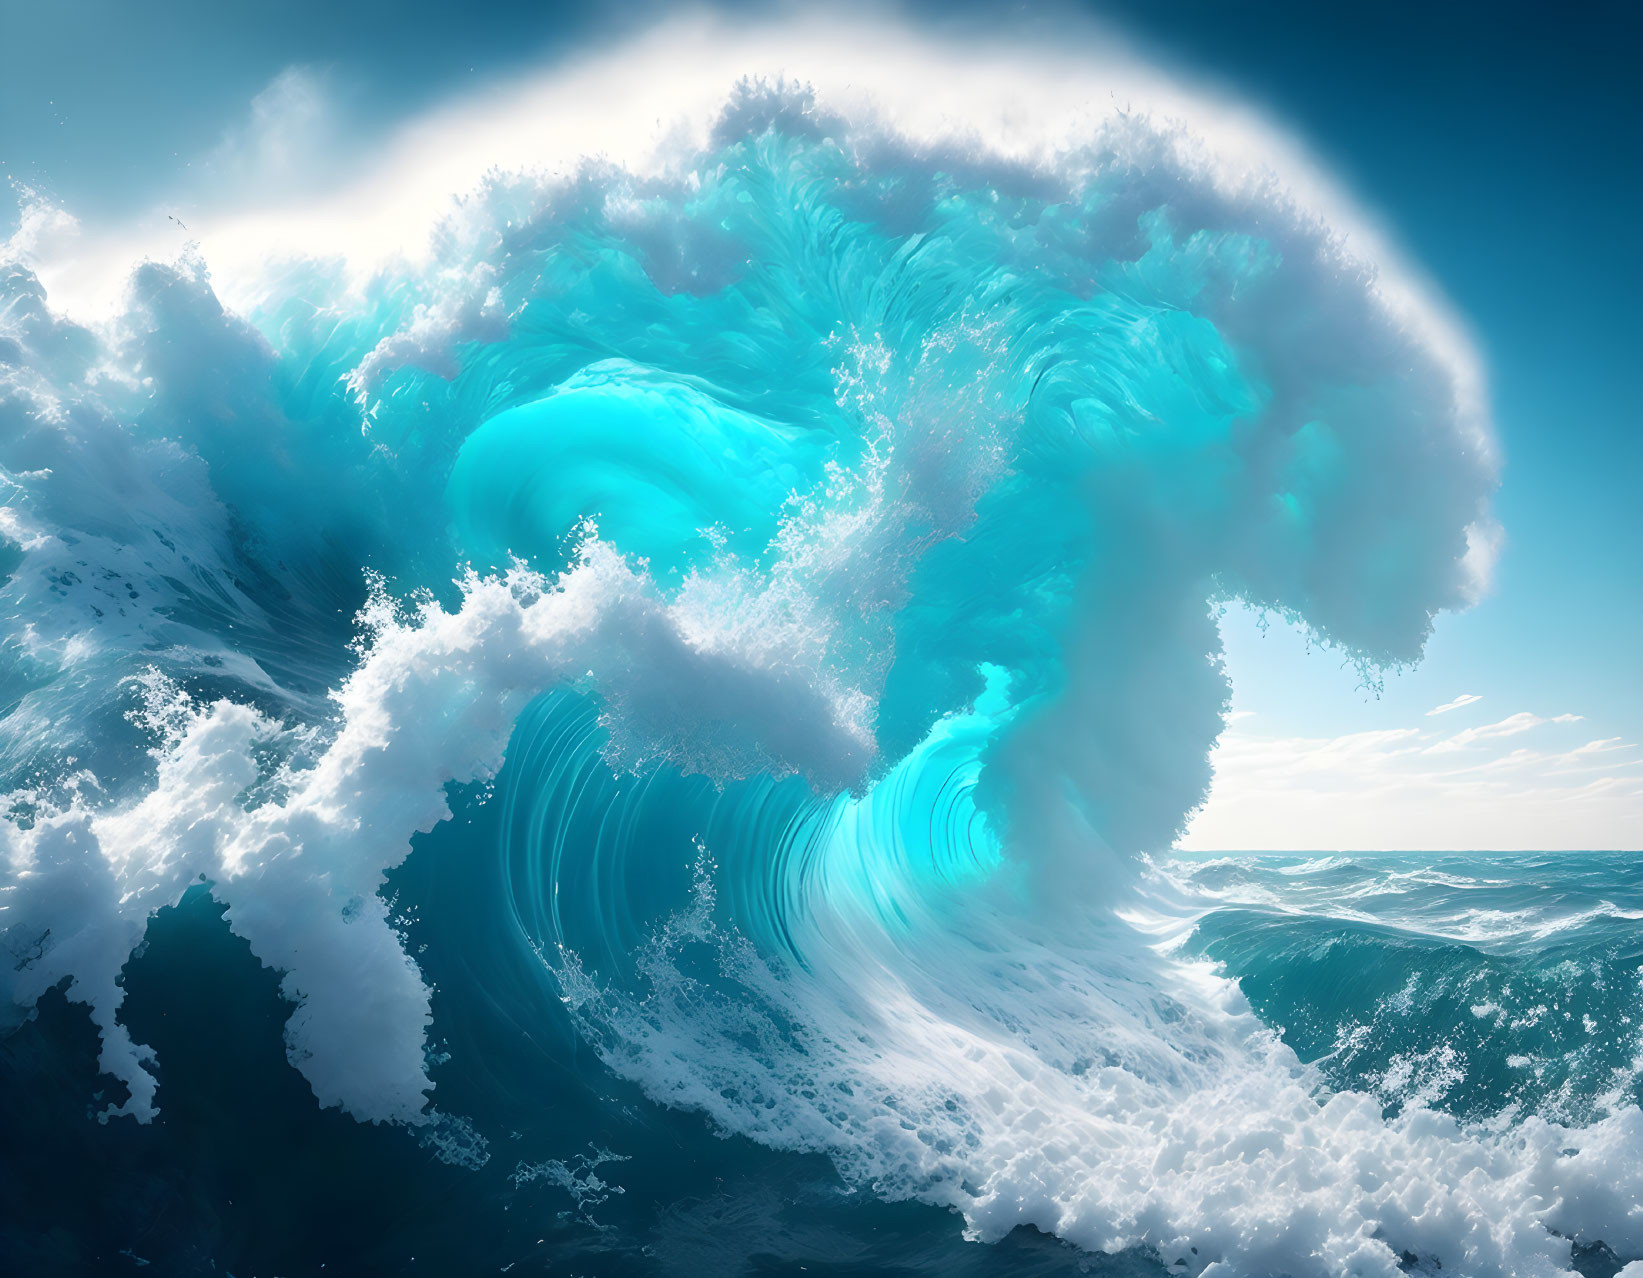 Majestic turquoise wave about to break against bright sky